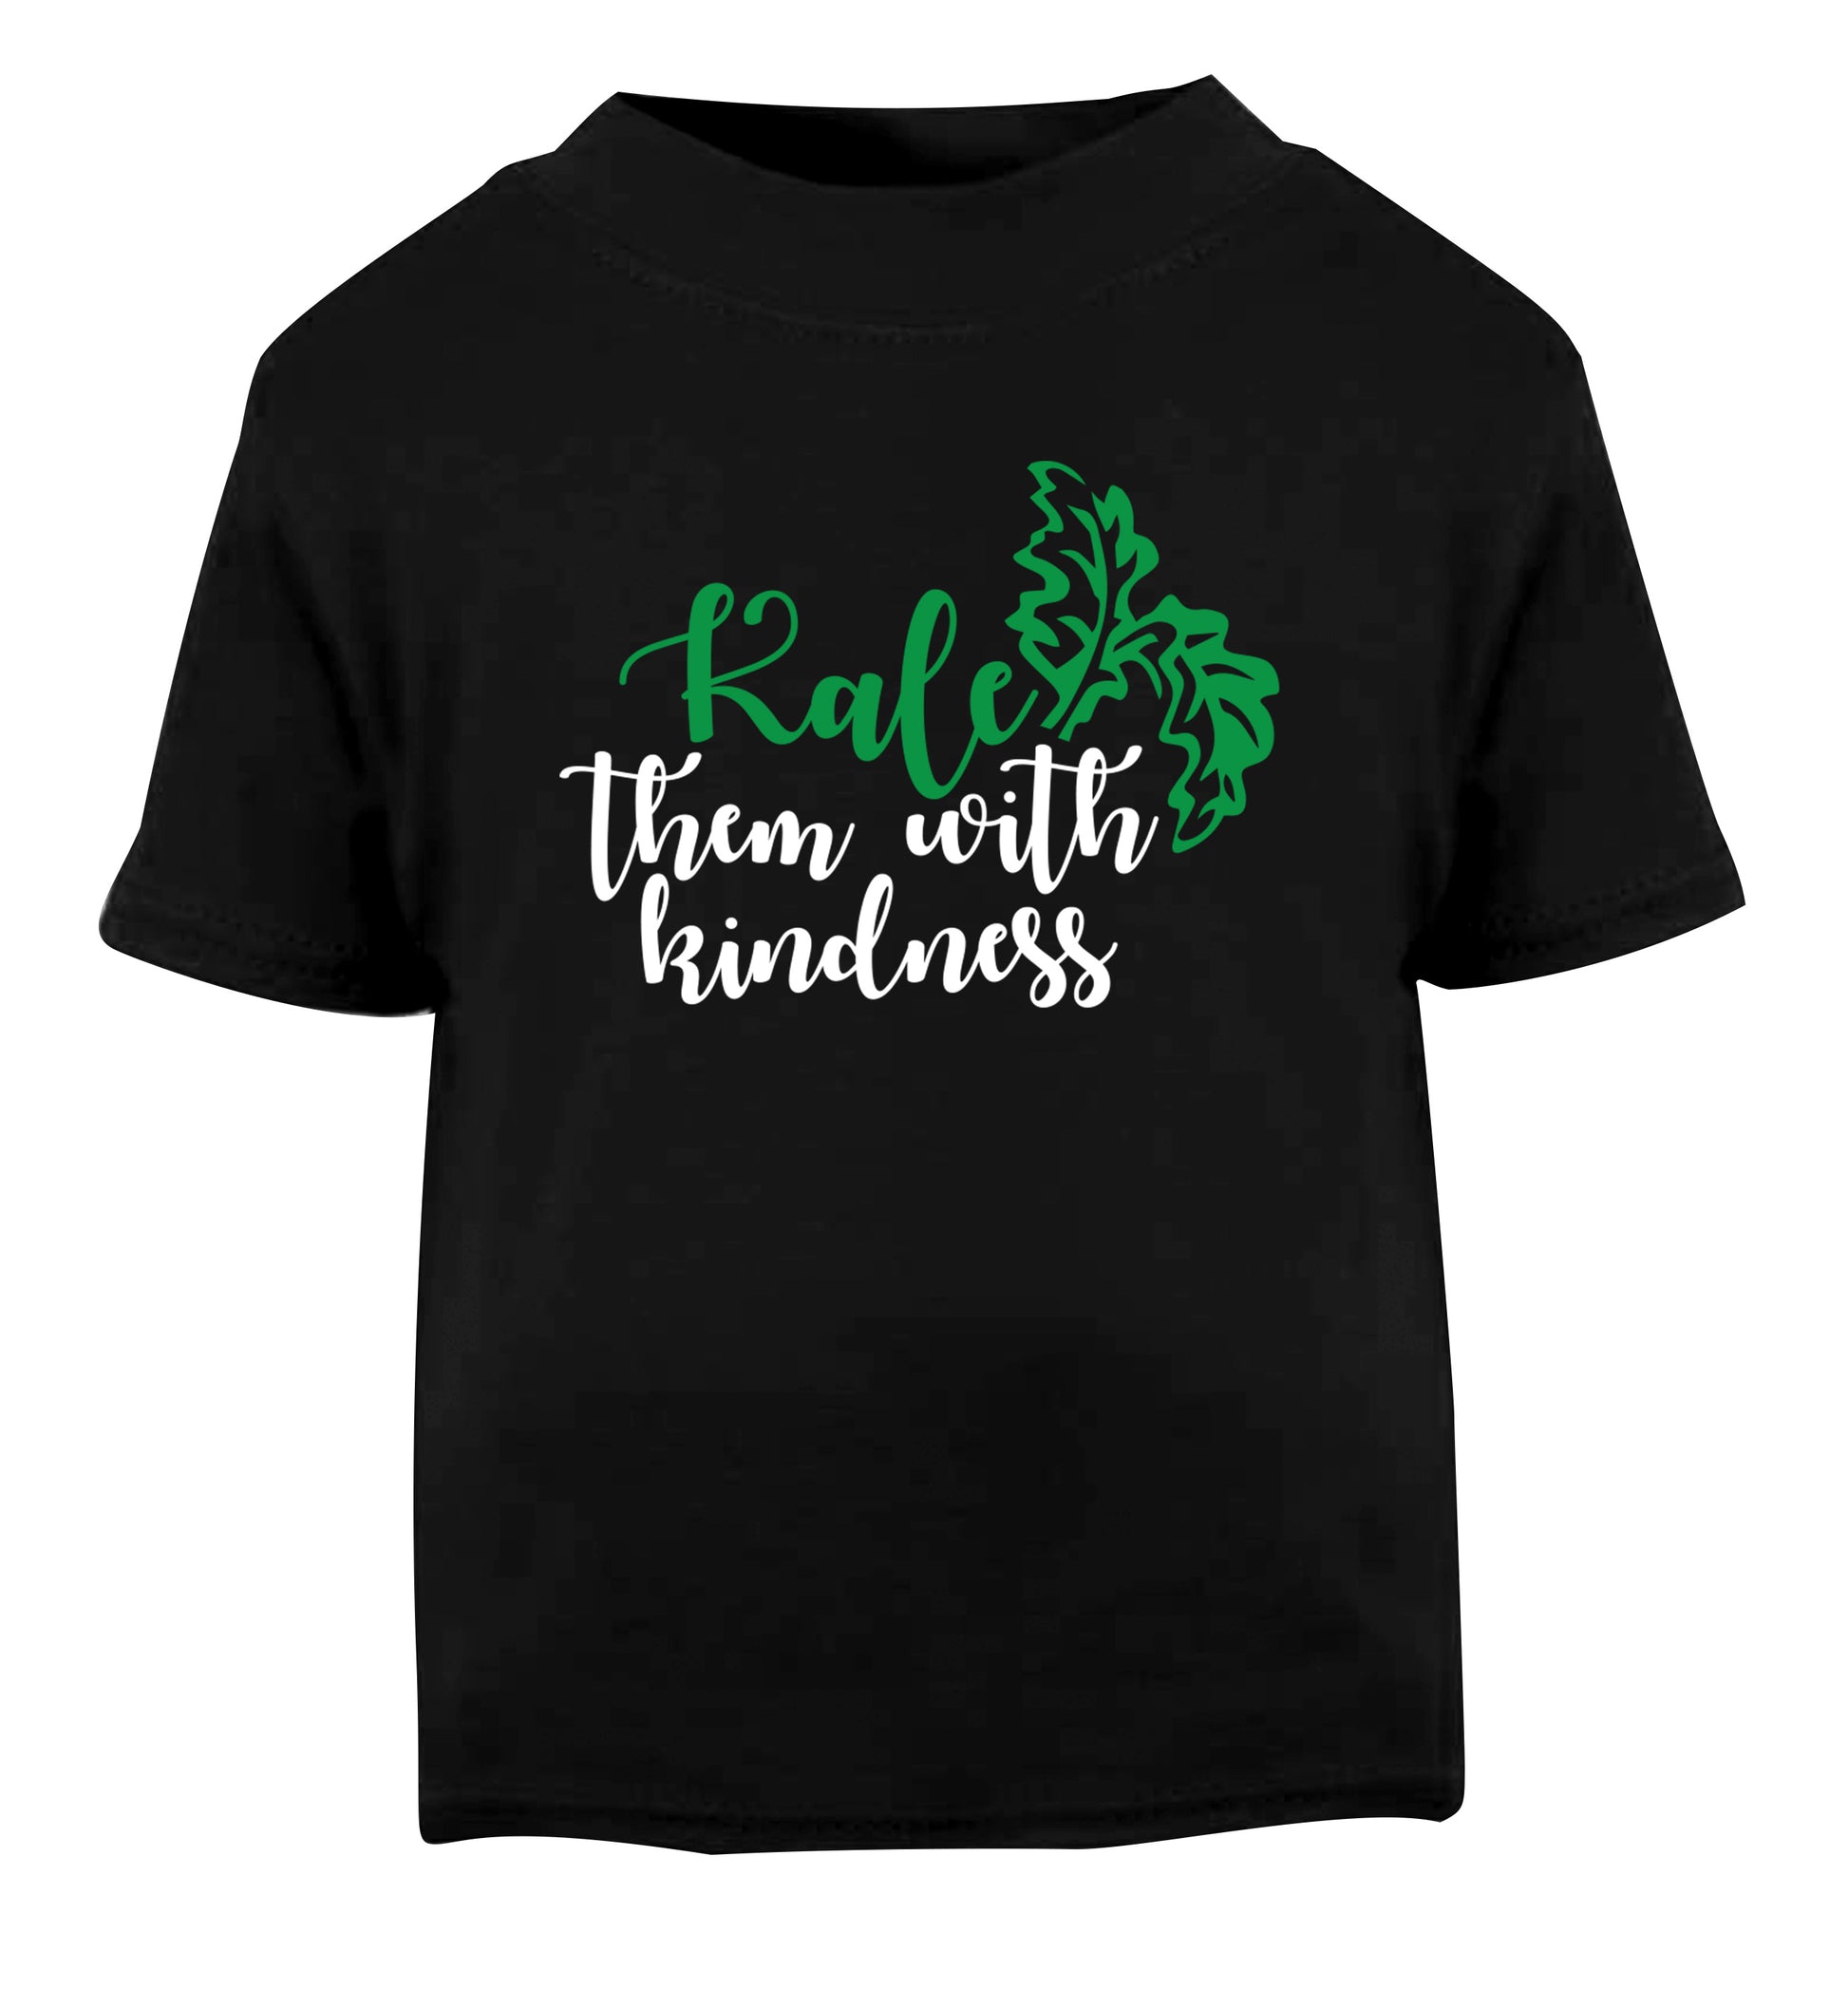 Kale them with kindness Black Baby Toddler Tshirt 2 years